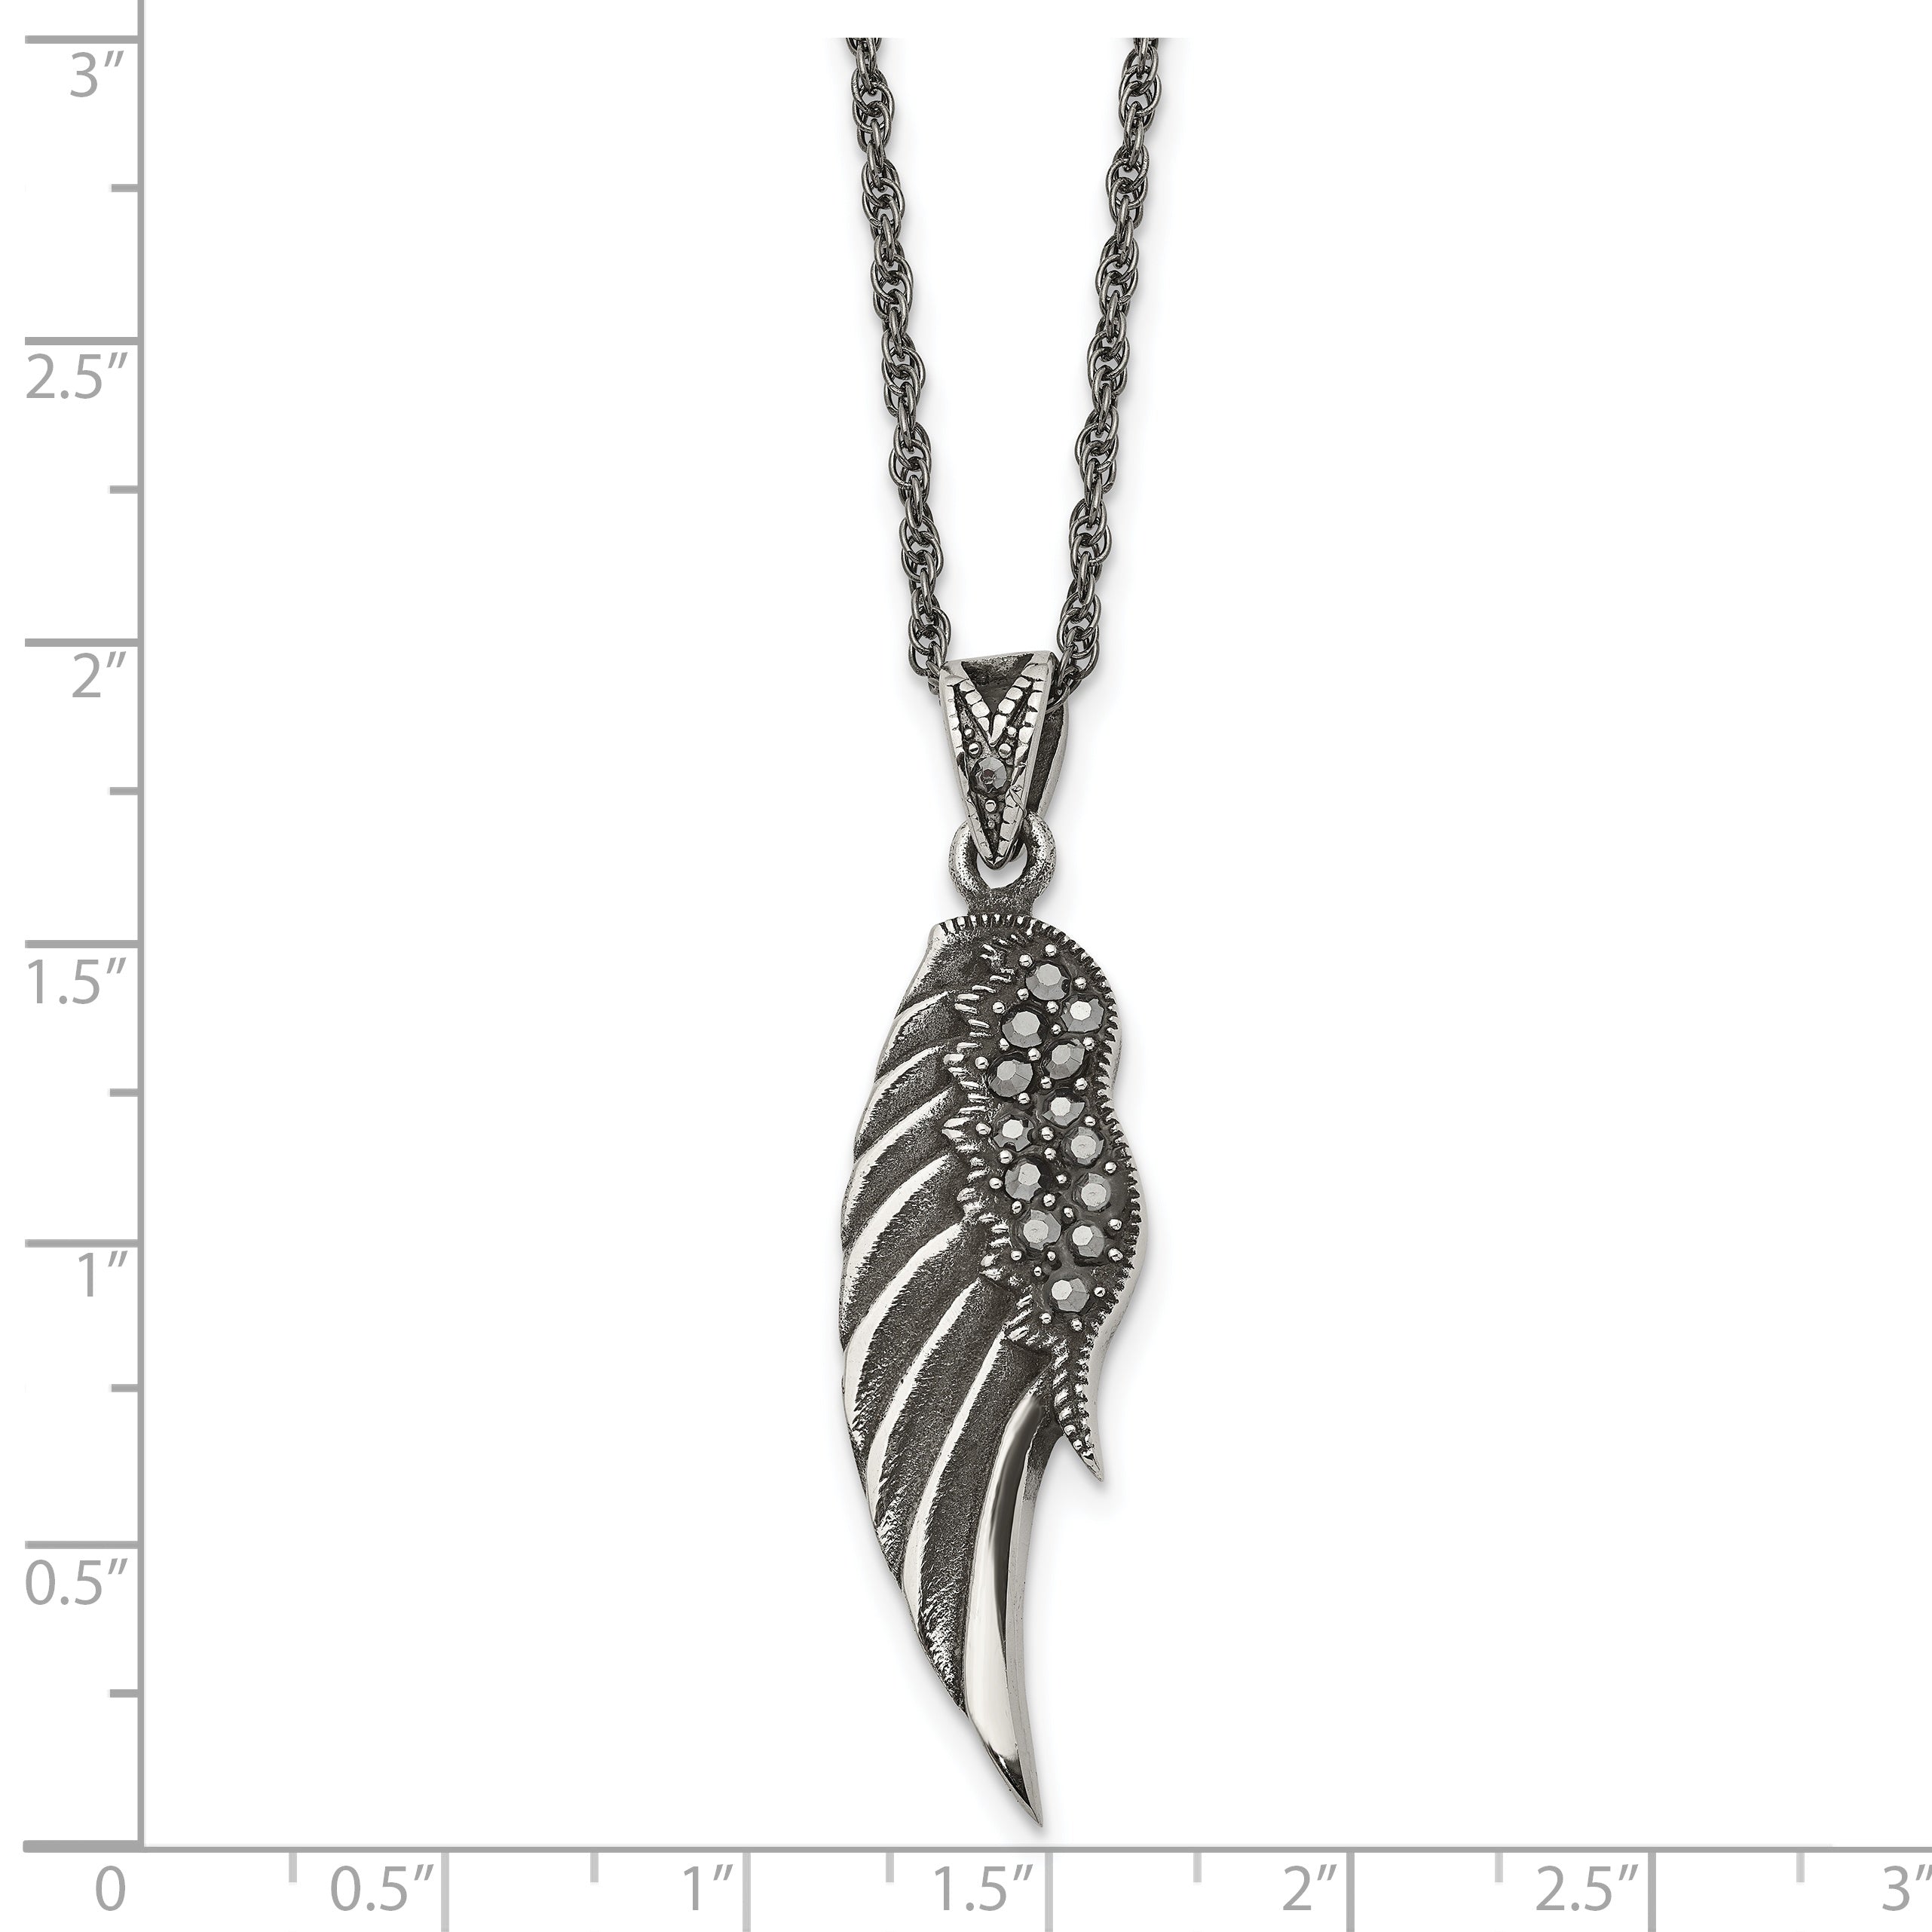 Chisel Stainless Steel Antiqued and Polished with Marcasite Wing Pendant on a 20 inch Singapore Chain Necklace